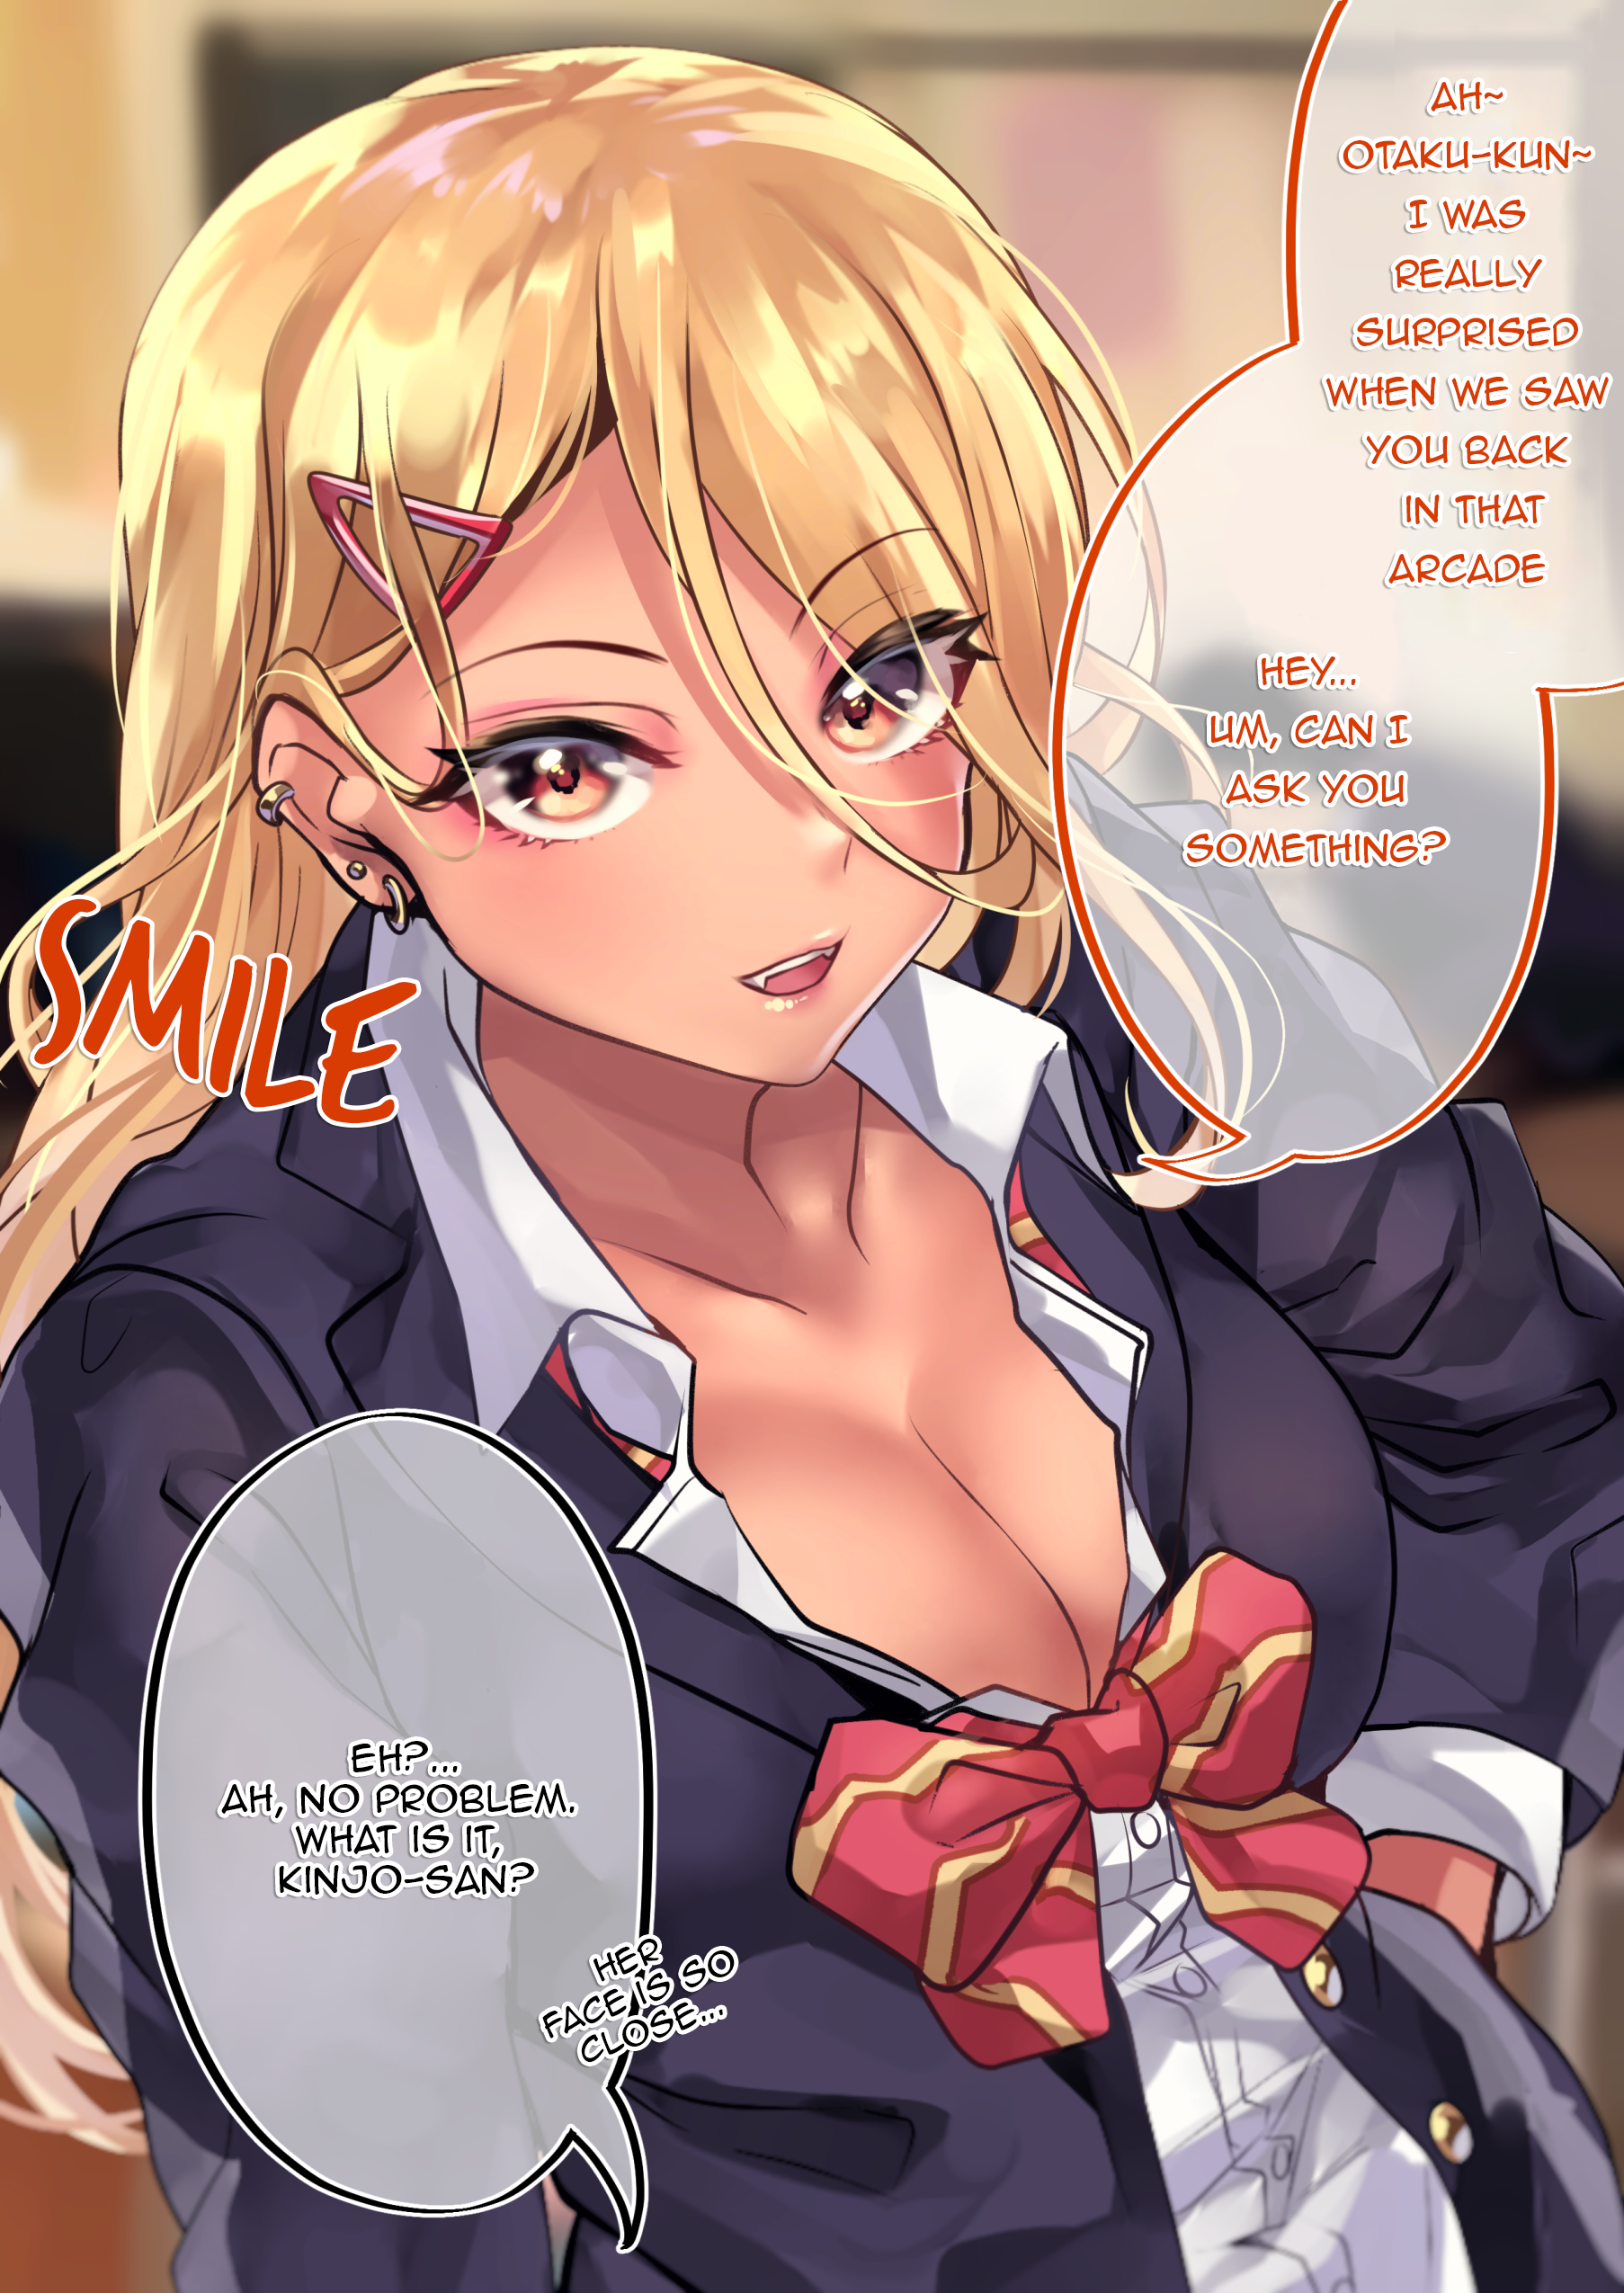 The Story Of An Otaku And A Gyaru Falling In Love Chapter 24: Affection Level: Kinjo 15% Osanai 17% - Picture 1